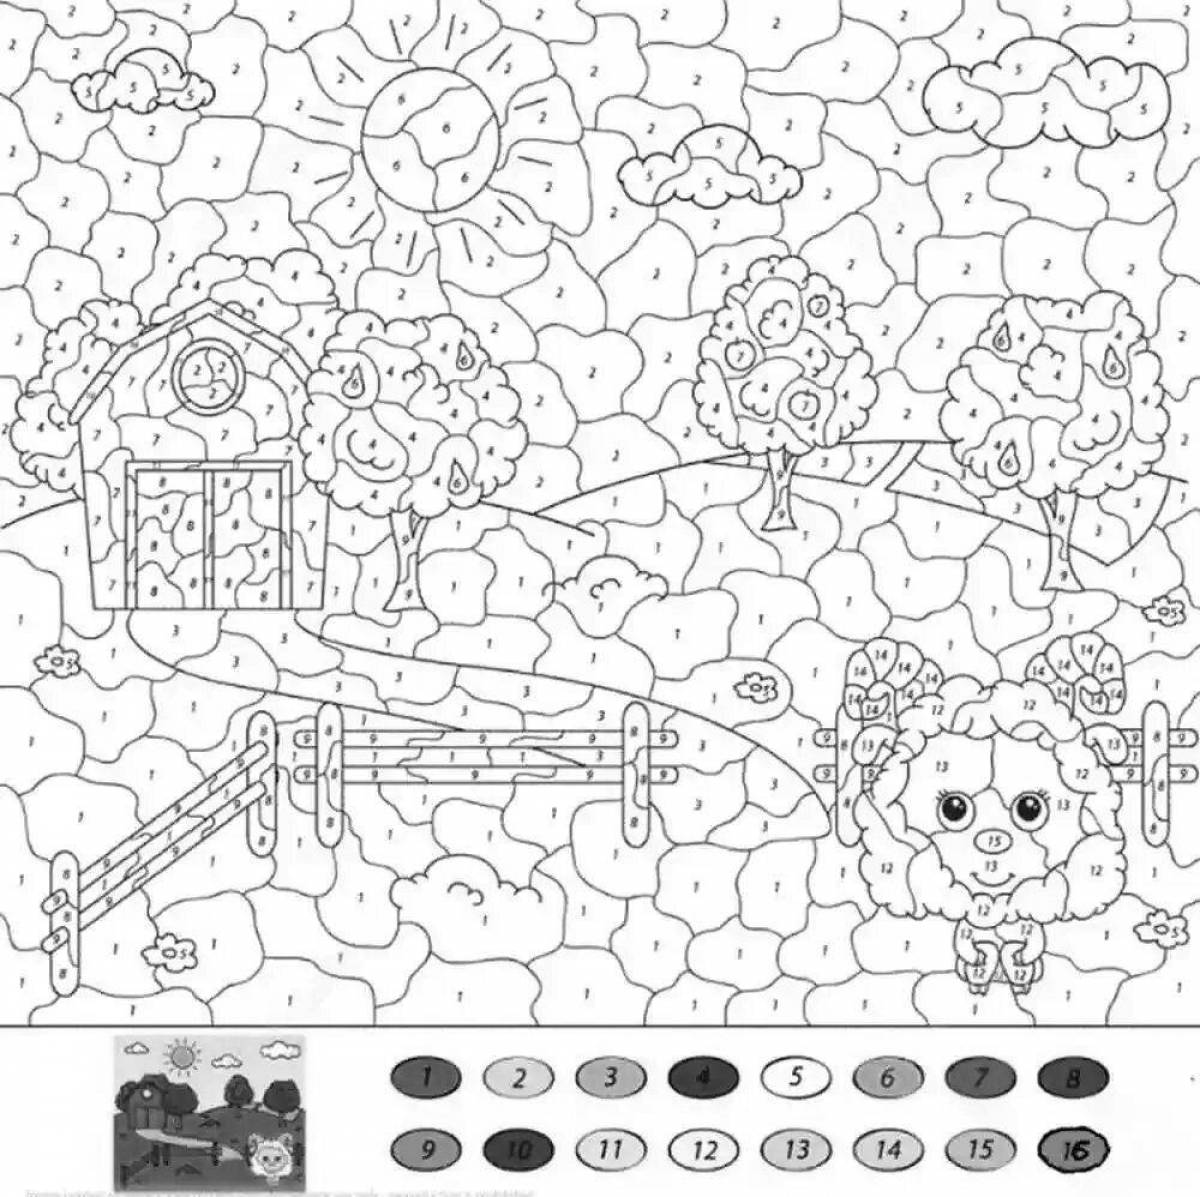 Tempting license plate coloring page